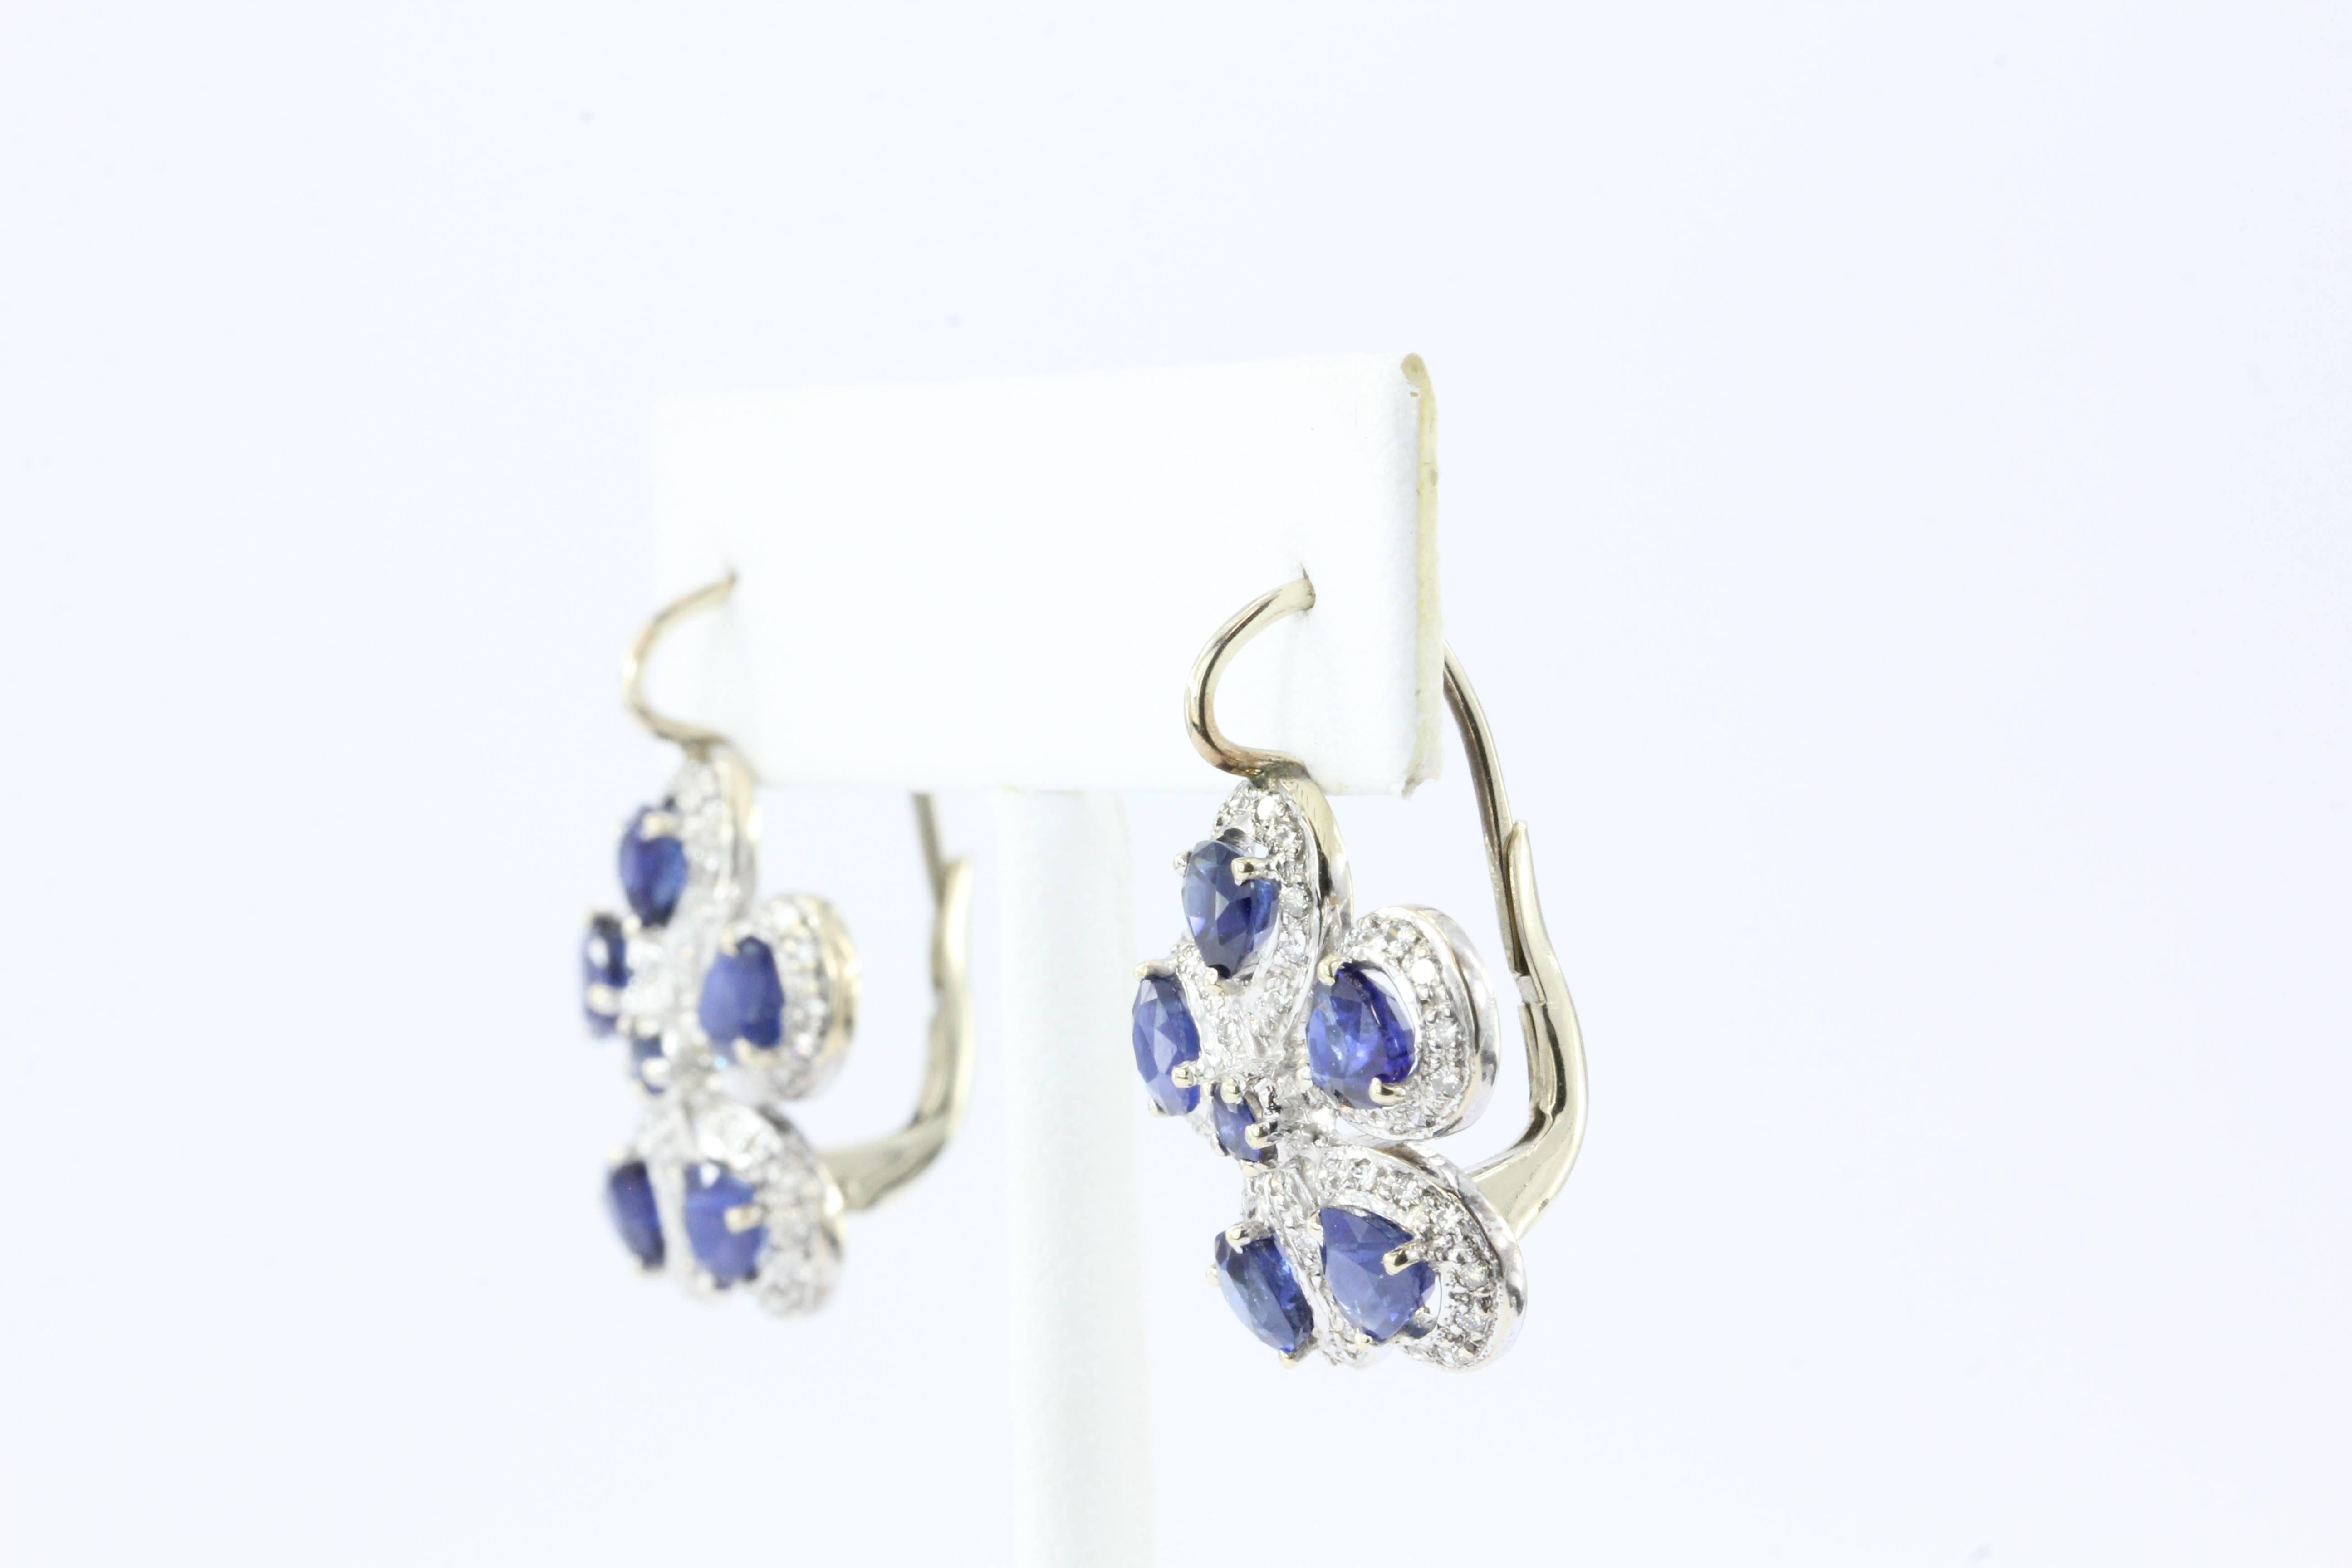 Retro 14K White & Yellow Gold Natural Blue Sapphire & Diamond Earrings

These adorable and elegant hand crafted five petal flower earrings are set with natural blue sapphires and diamond outlines. There is approximately 2 carats of natural